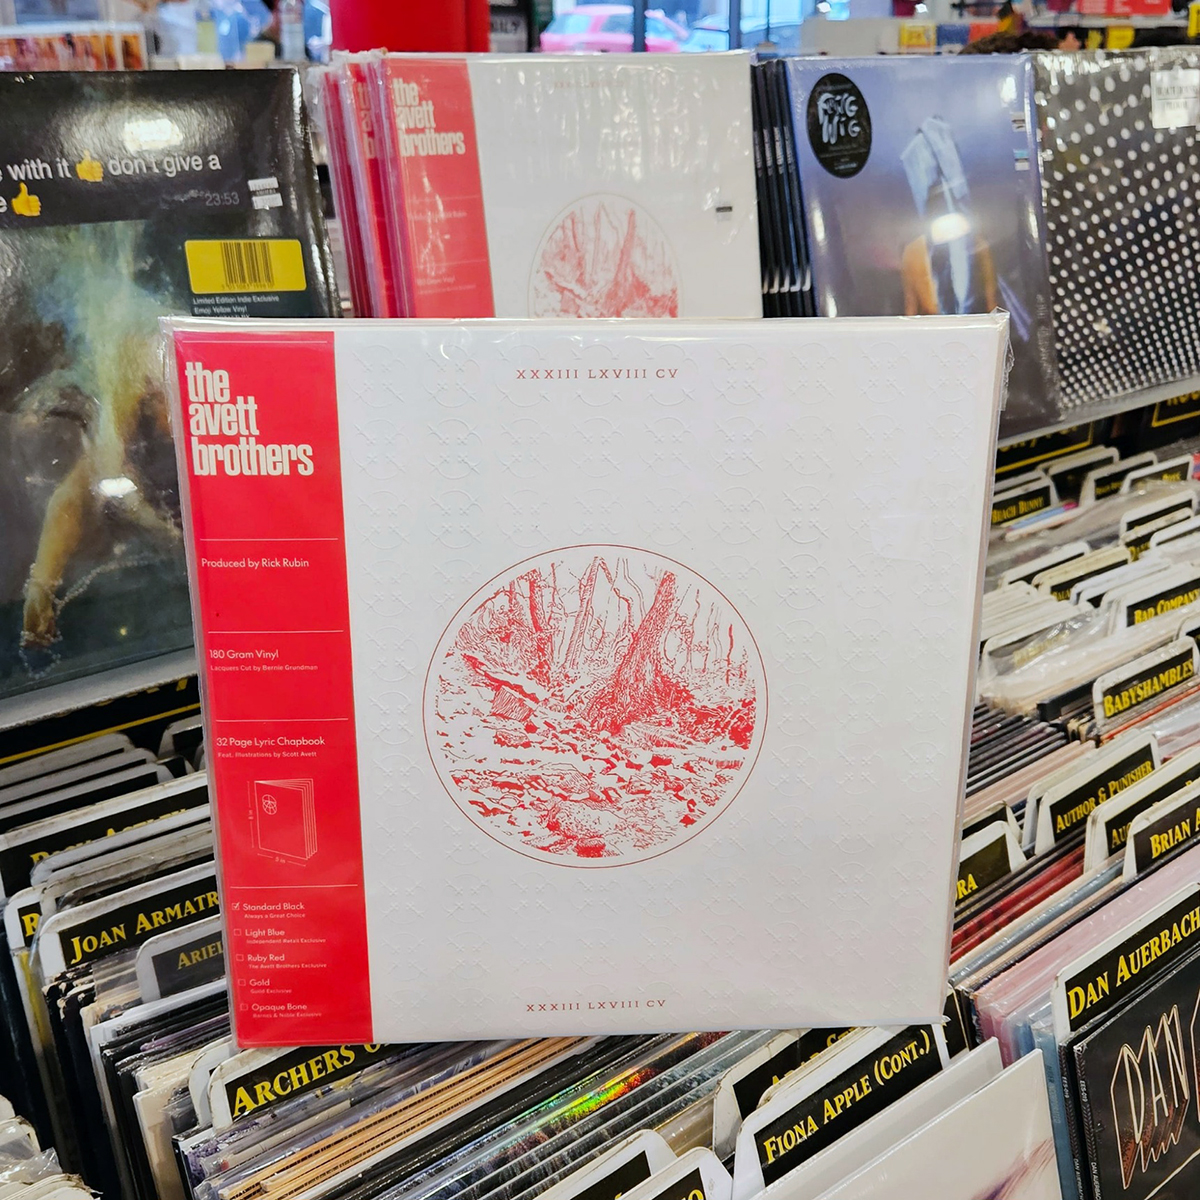 .@theavettbros are back with a warm and inviting new self-titled album. The band's lilting indie-folk and exquisite melodies pack an emotional punch. 'The Avett Brothers' is out now on CD and vinyl via @ramseurrecords. Get it here: bit.ly/3UU3Koq